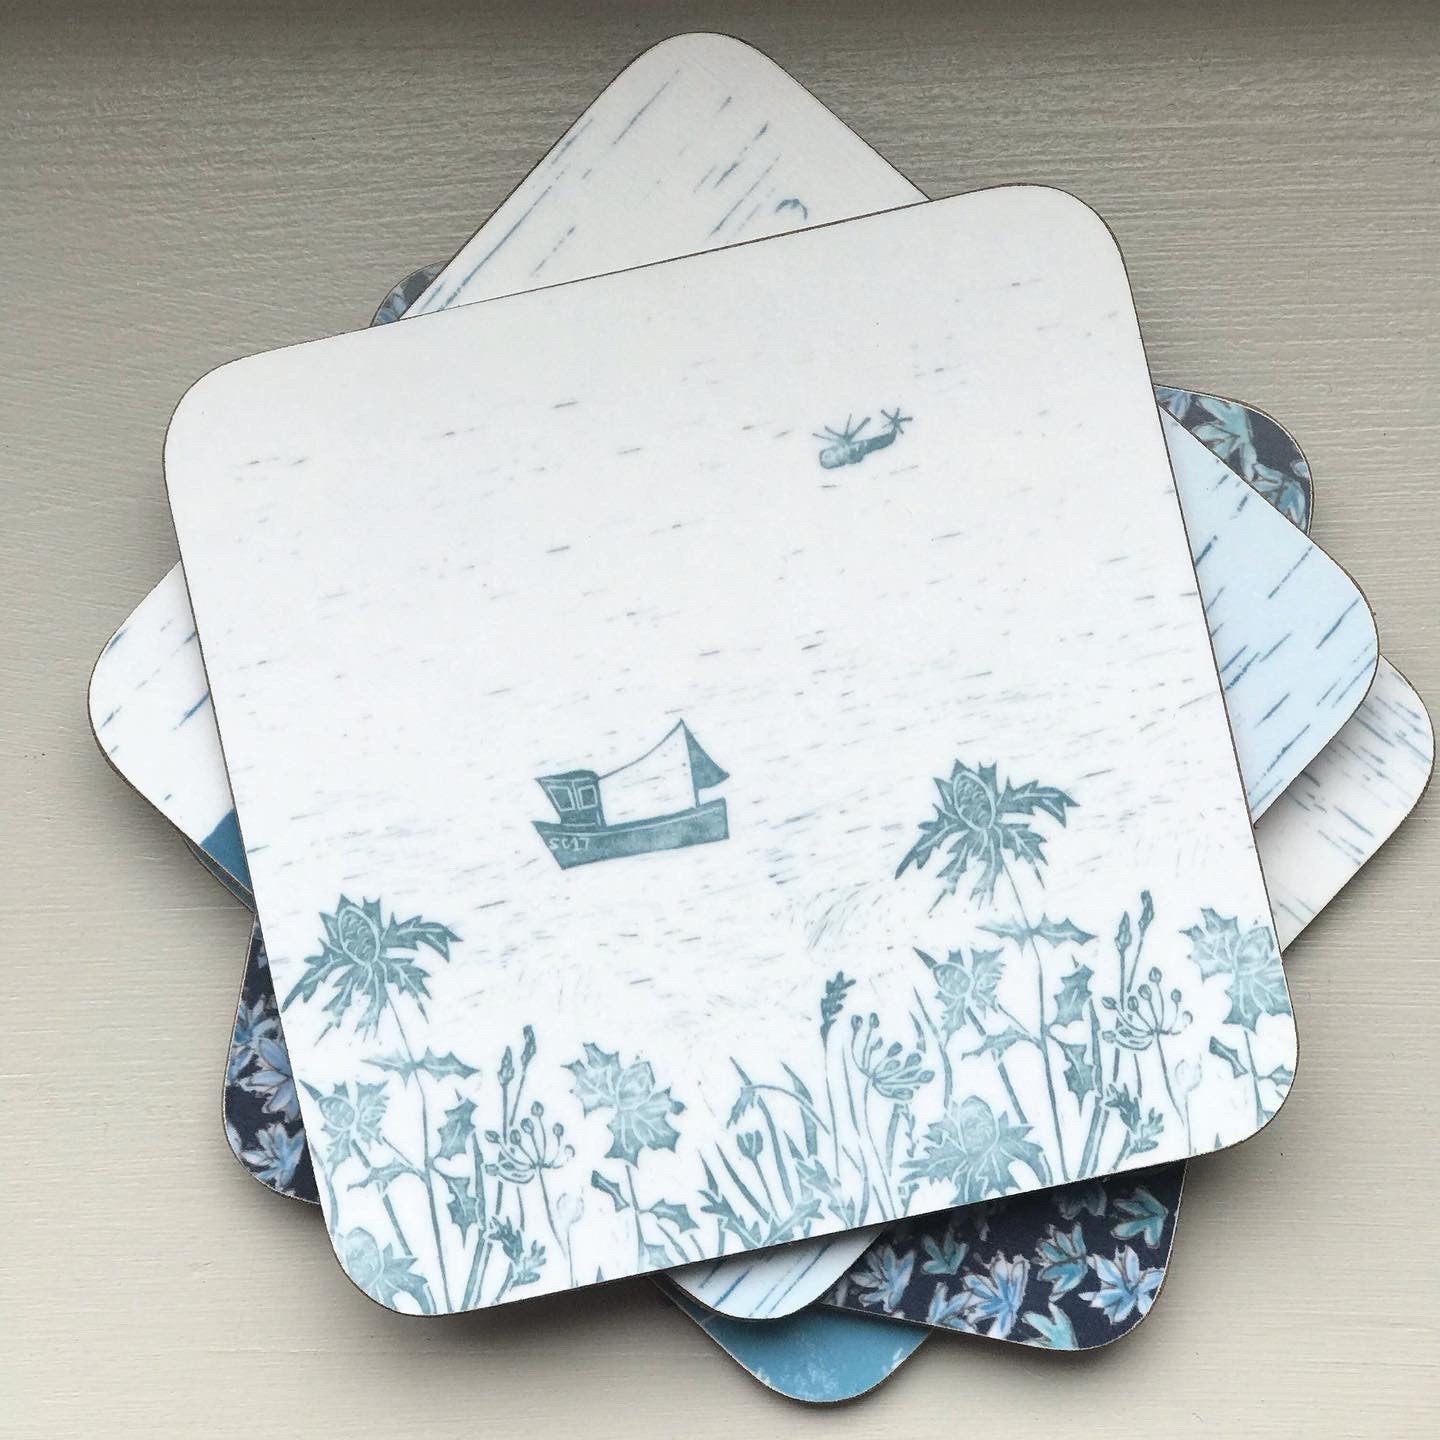 Isles of Scilly Coasters